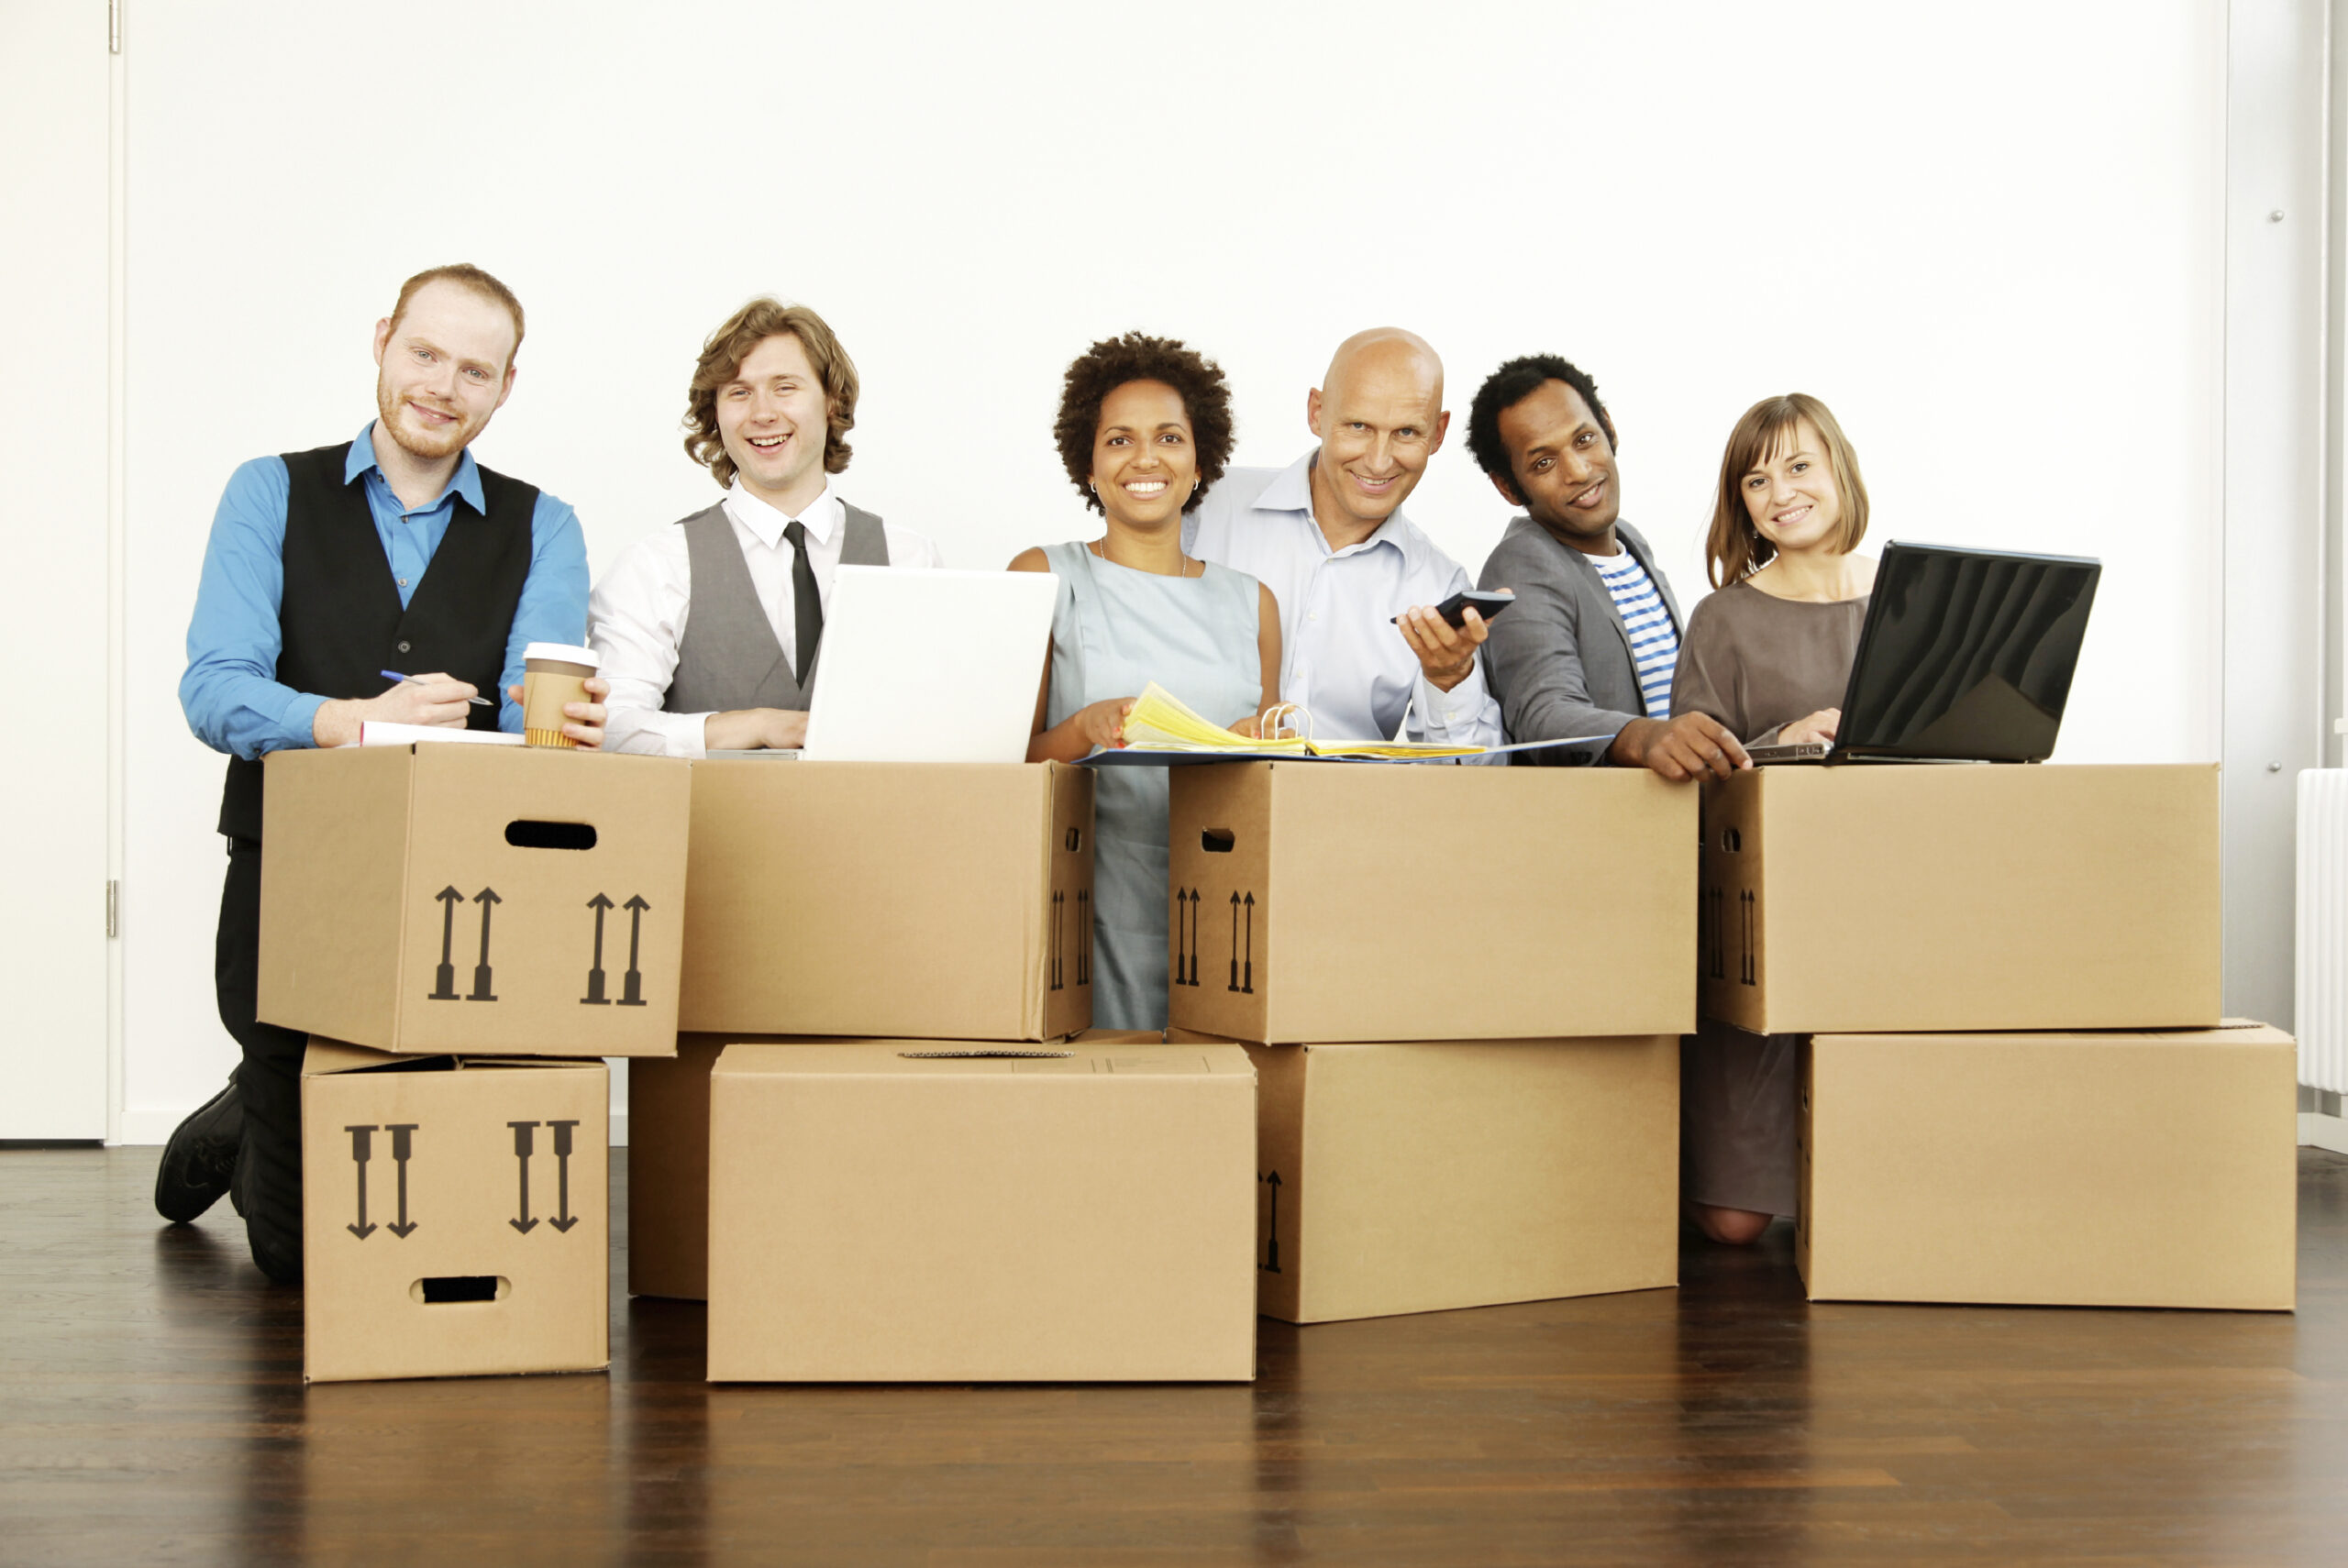 Tips to help facilities managers get better results from corporate moves